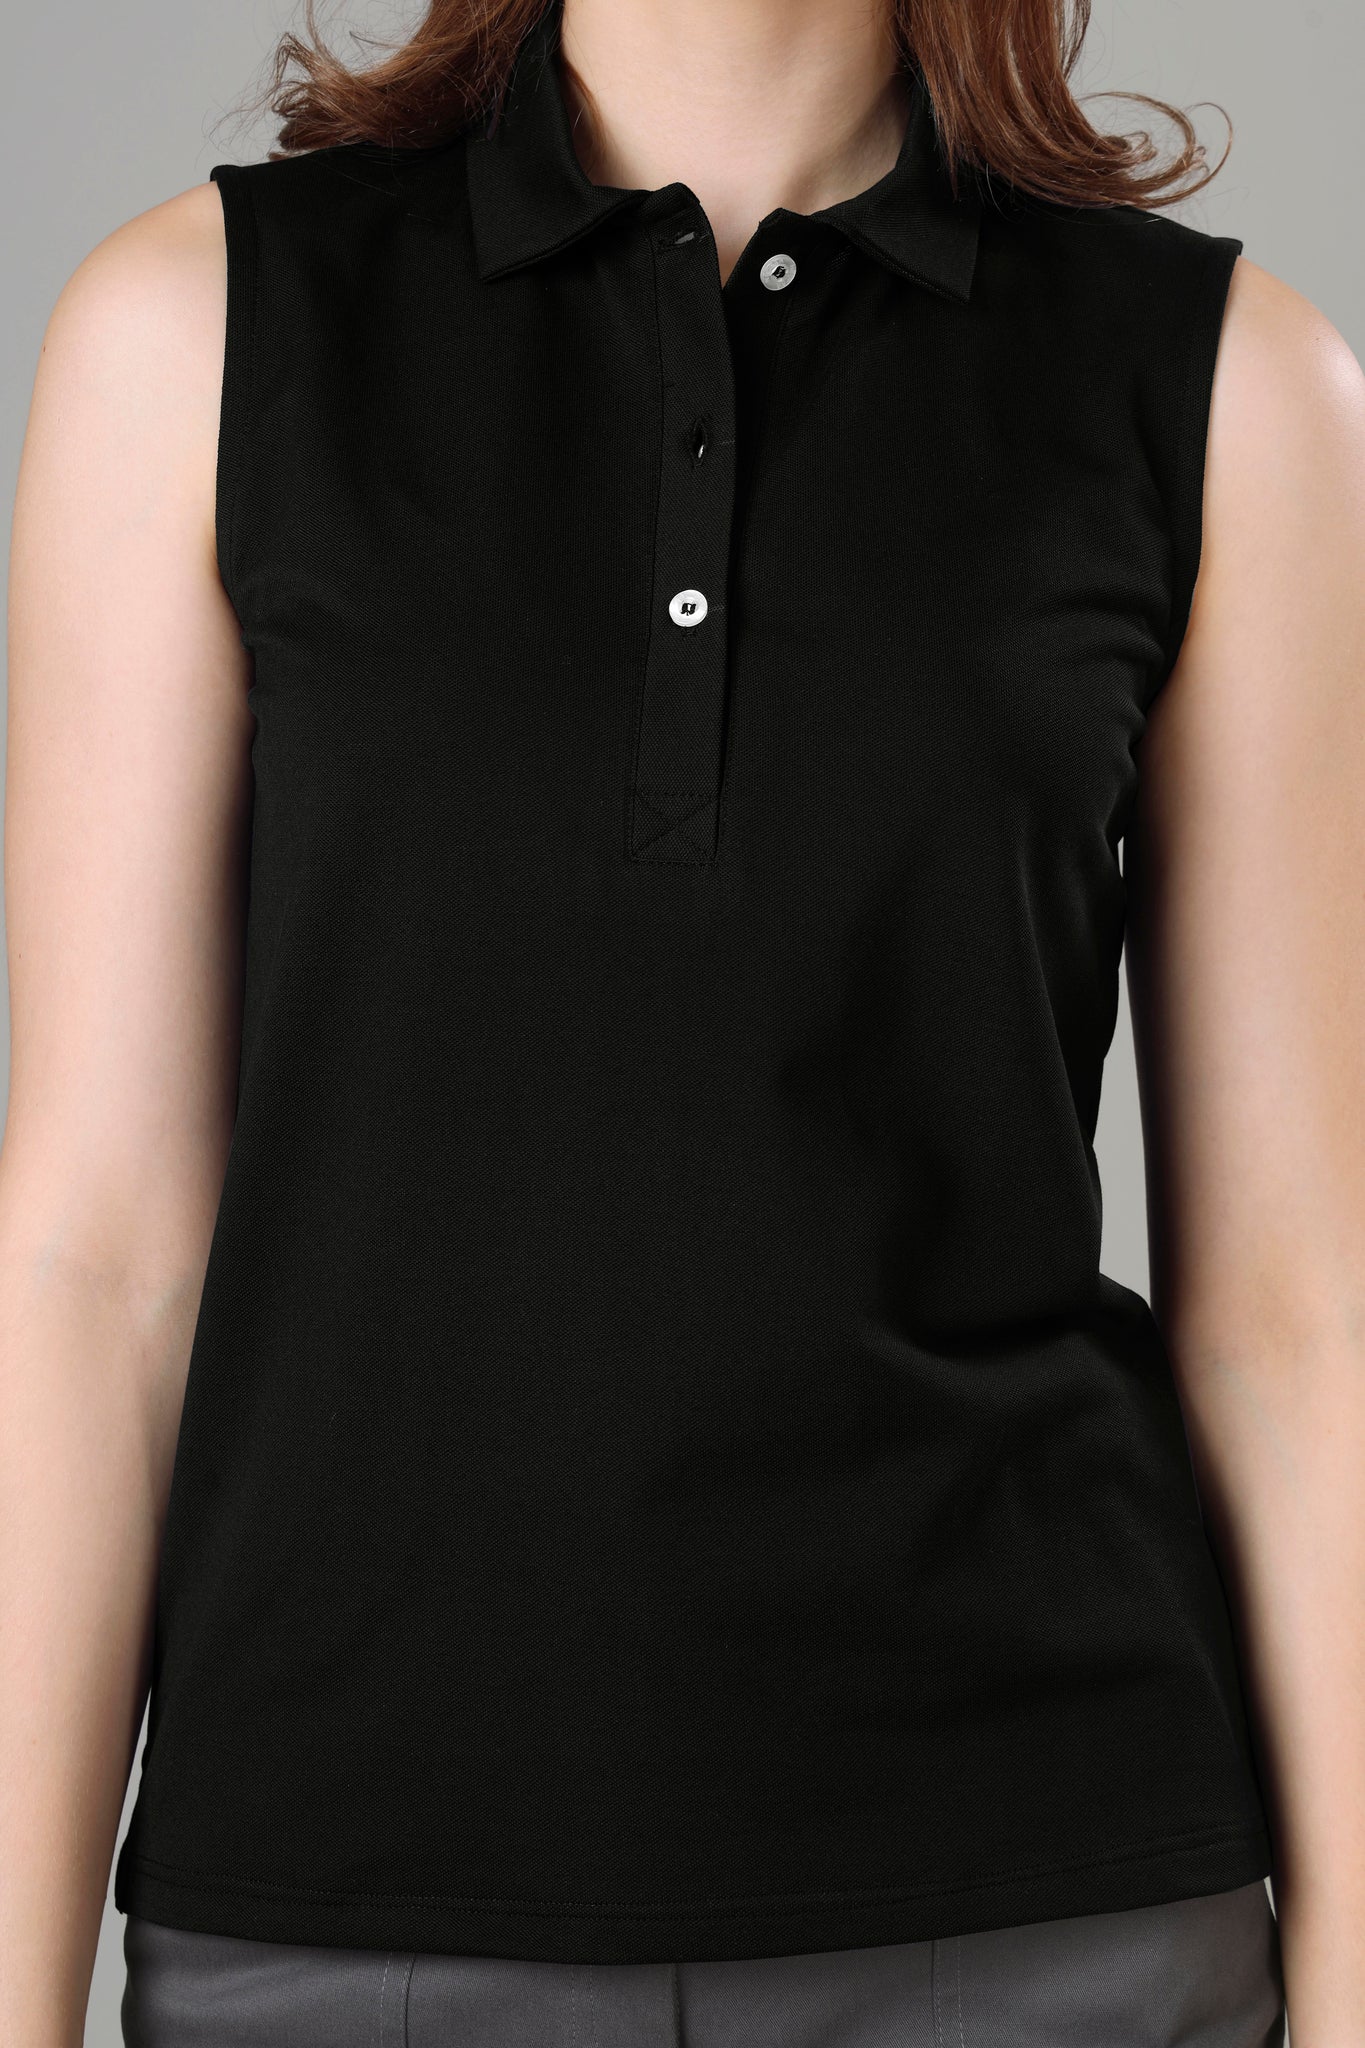 Exclusive Black Polo Sleeveless T-Shirt For Women